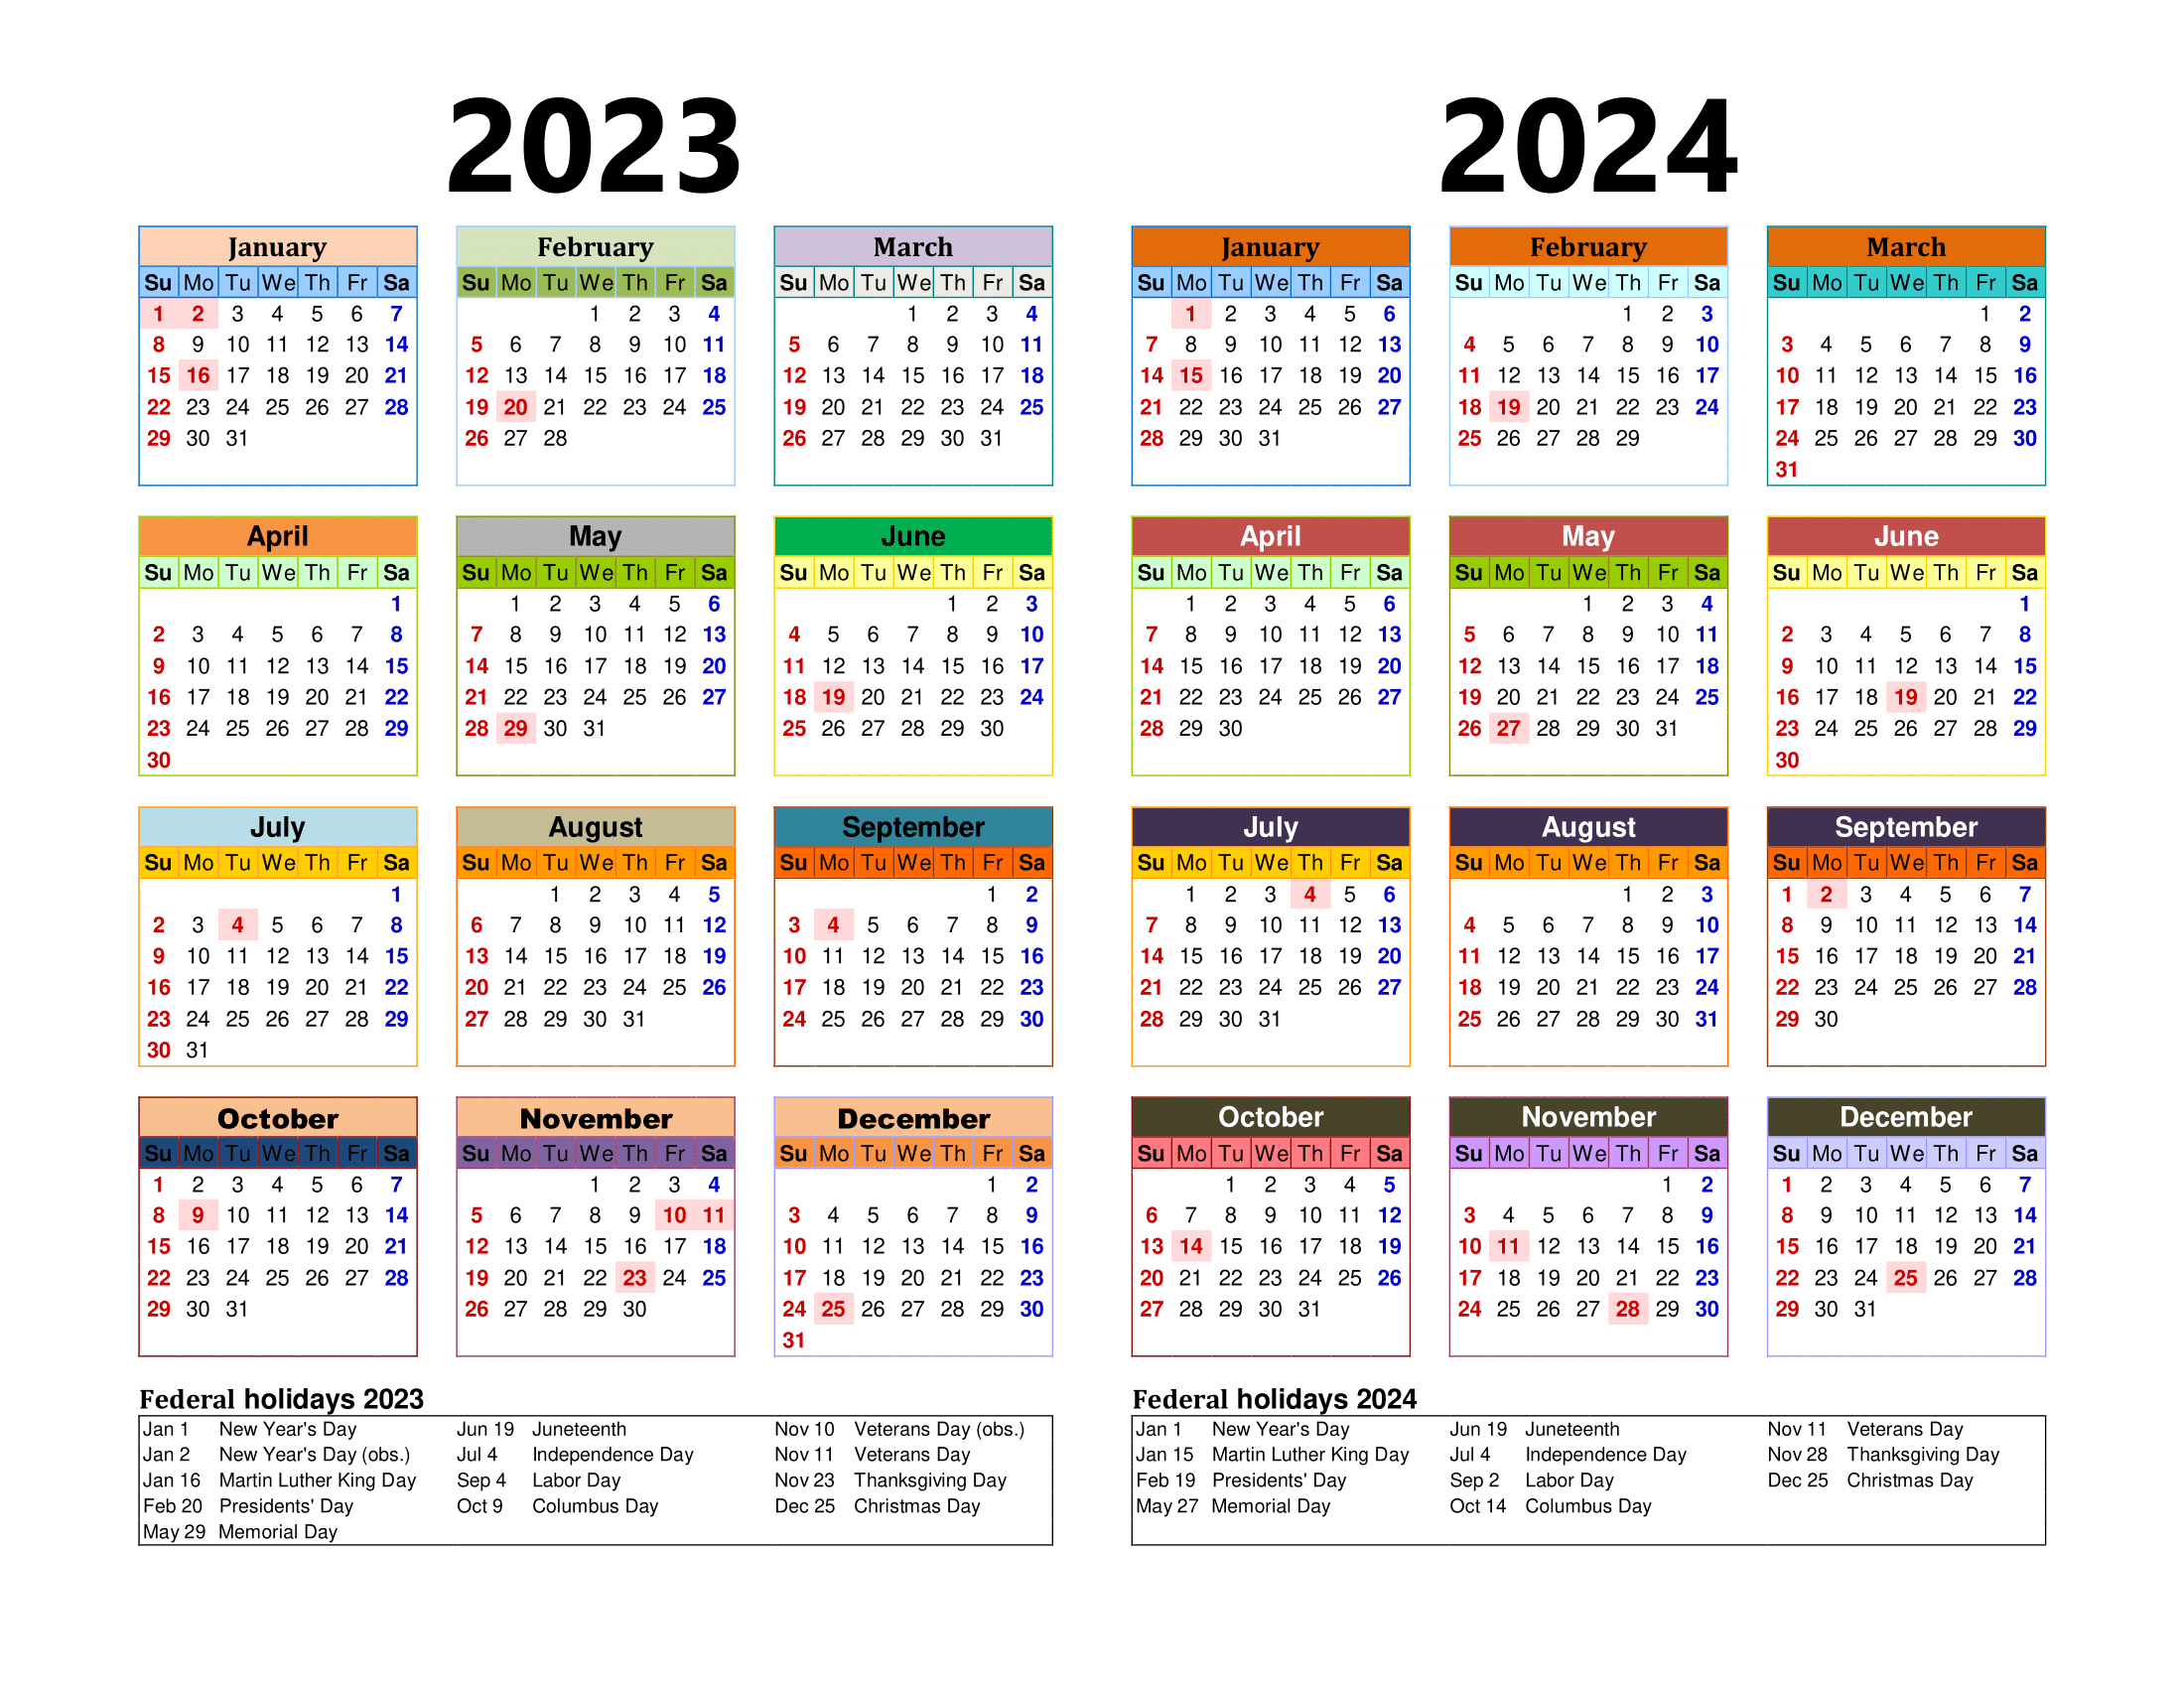 Free Printable Two Year Calendar Templates For 2023 And 2024 In Pdf for Printable Calendar 2023-2024